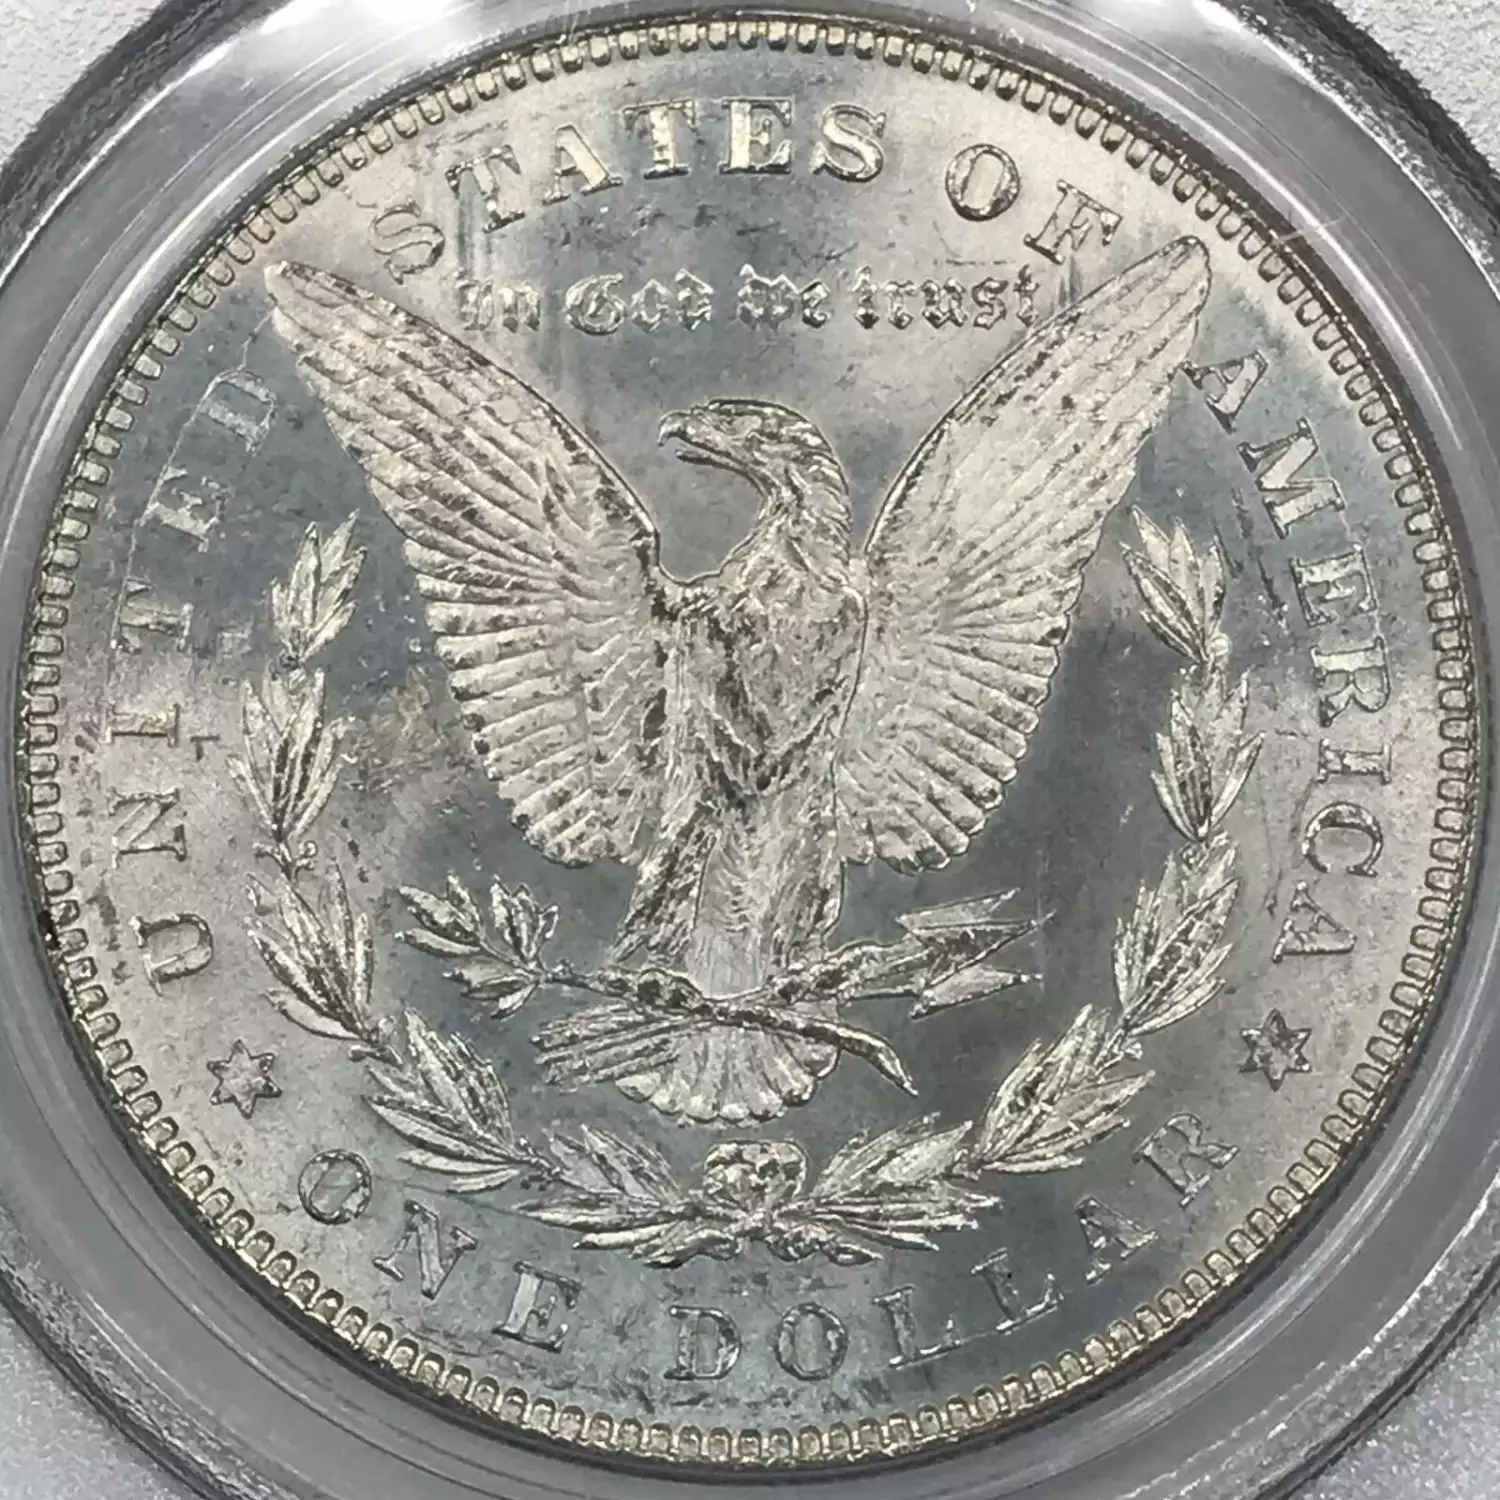 1878 7/8TF $1 Strong (4)